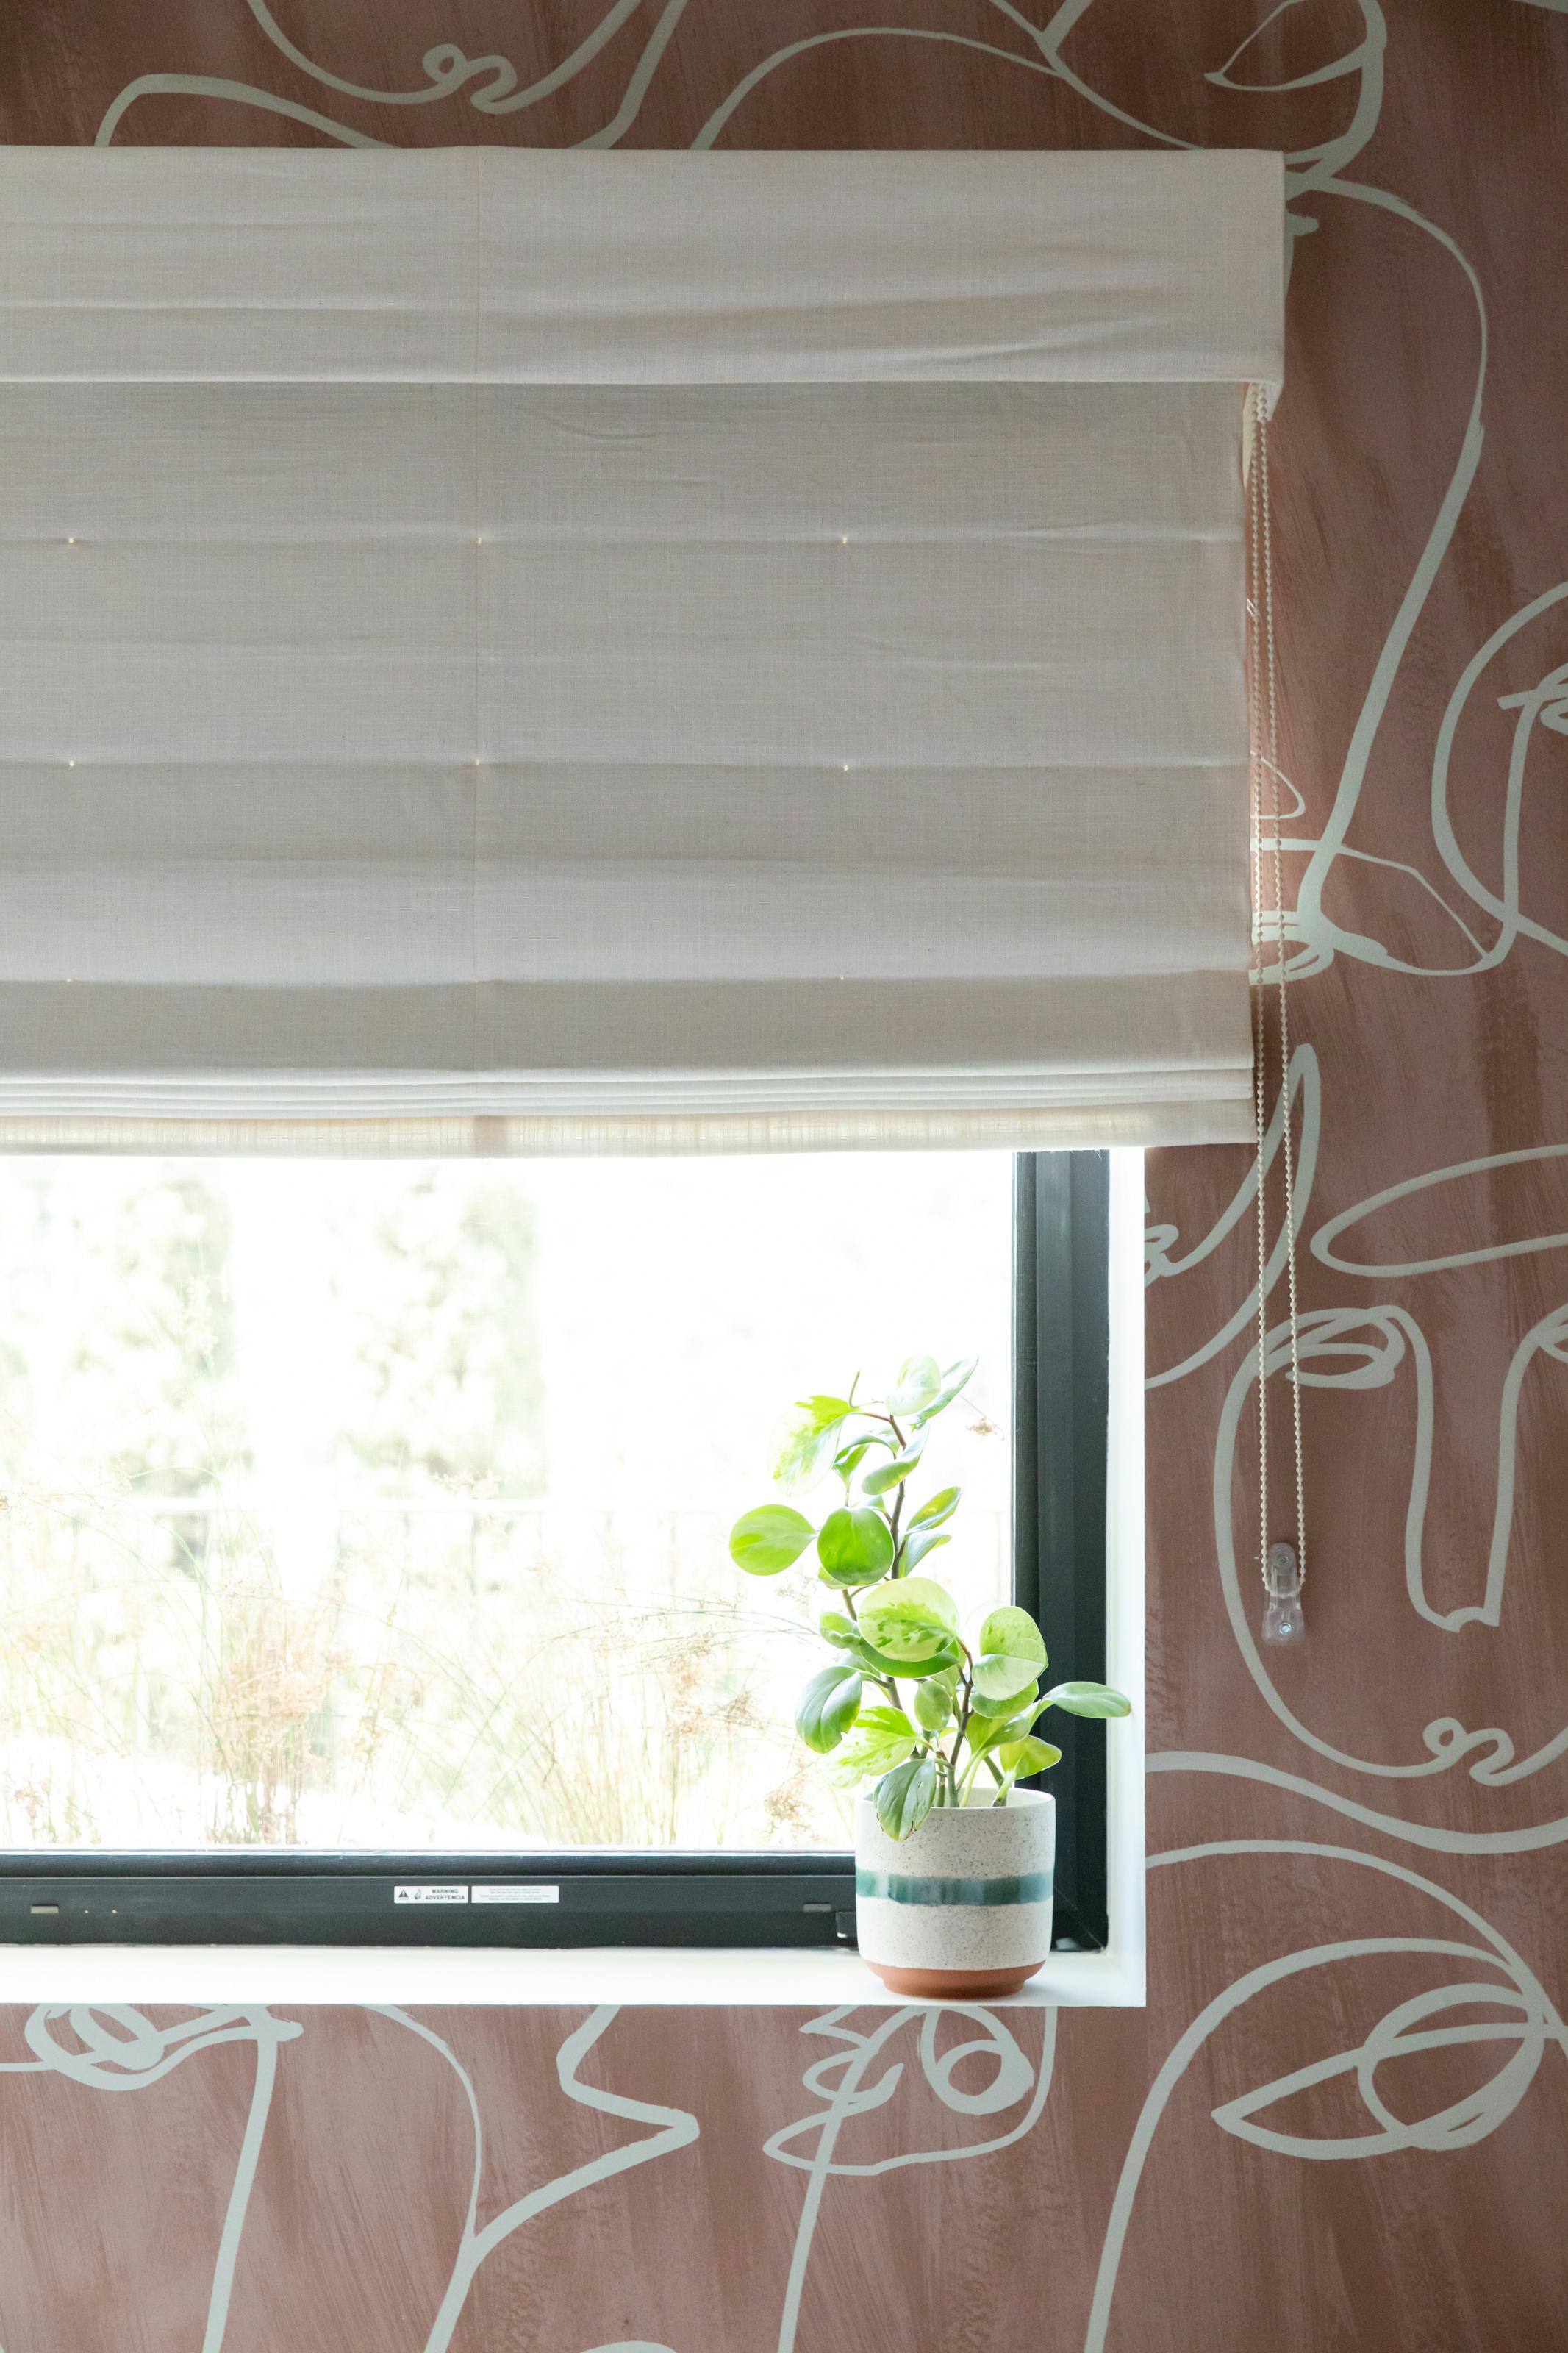 How To Install Blinds Outside Mount Everything You Need To Know About Outside Mount Window Treatments | The  Blinds.com Blog